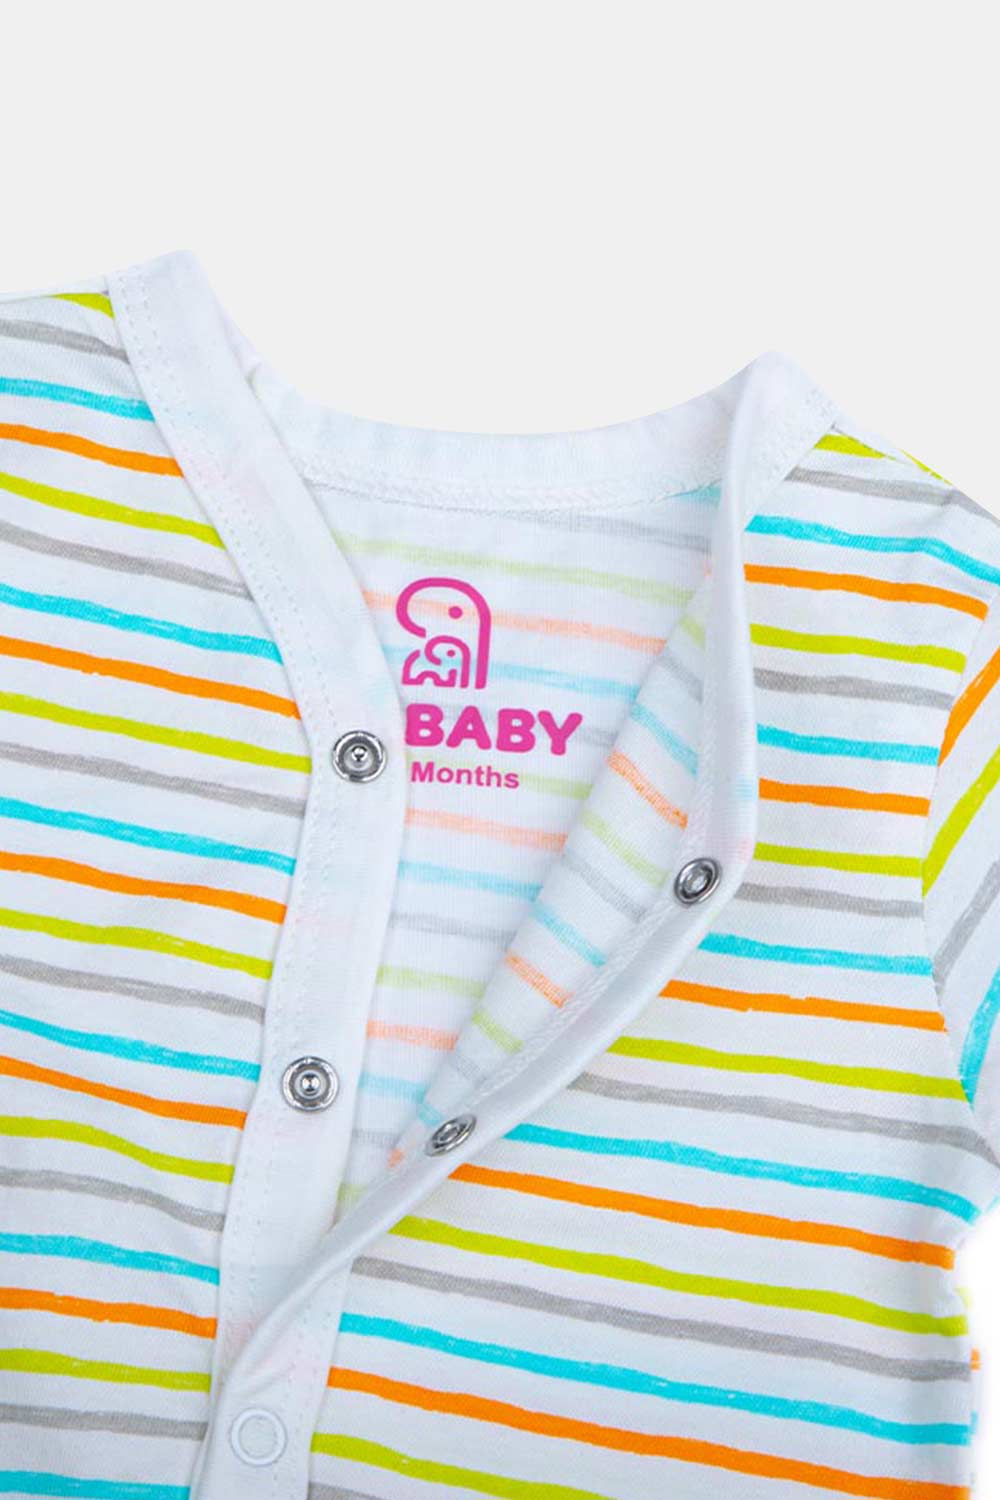 Oh Baby Scribbles Print V- Neck Half Sleeve - HS01 Size   0m-3m Color Off White